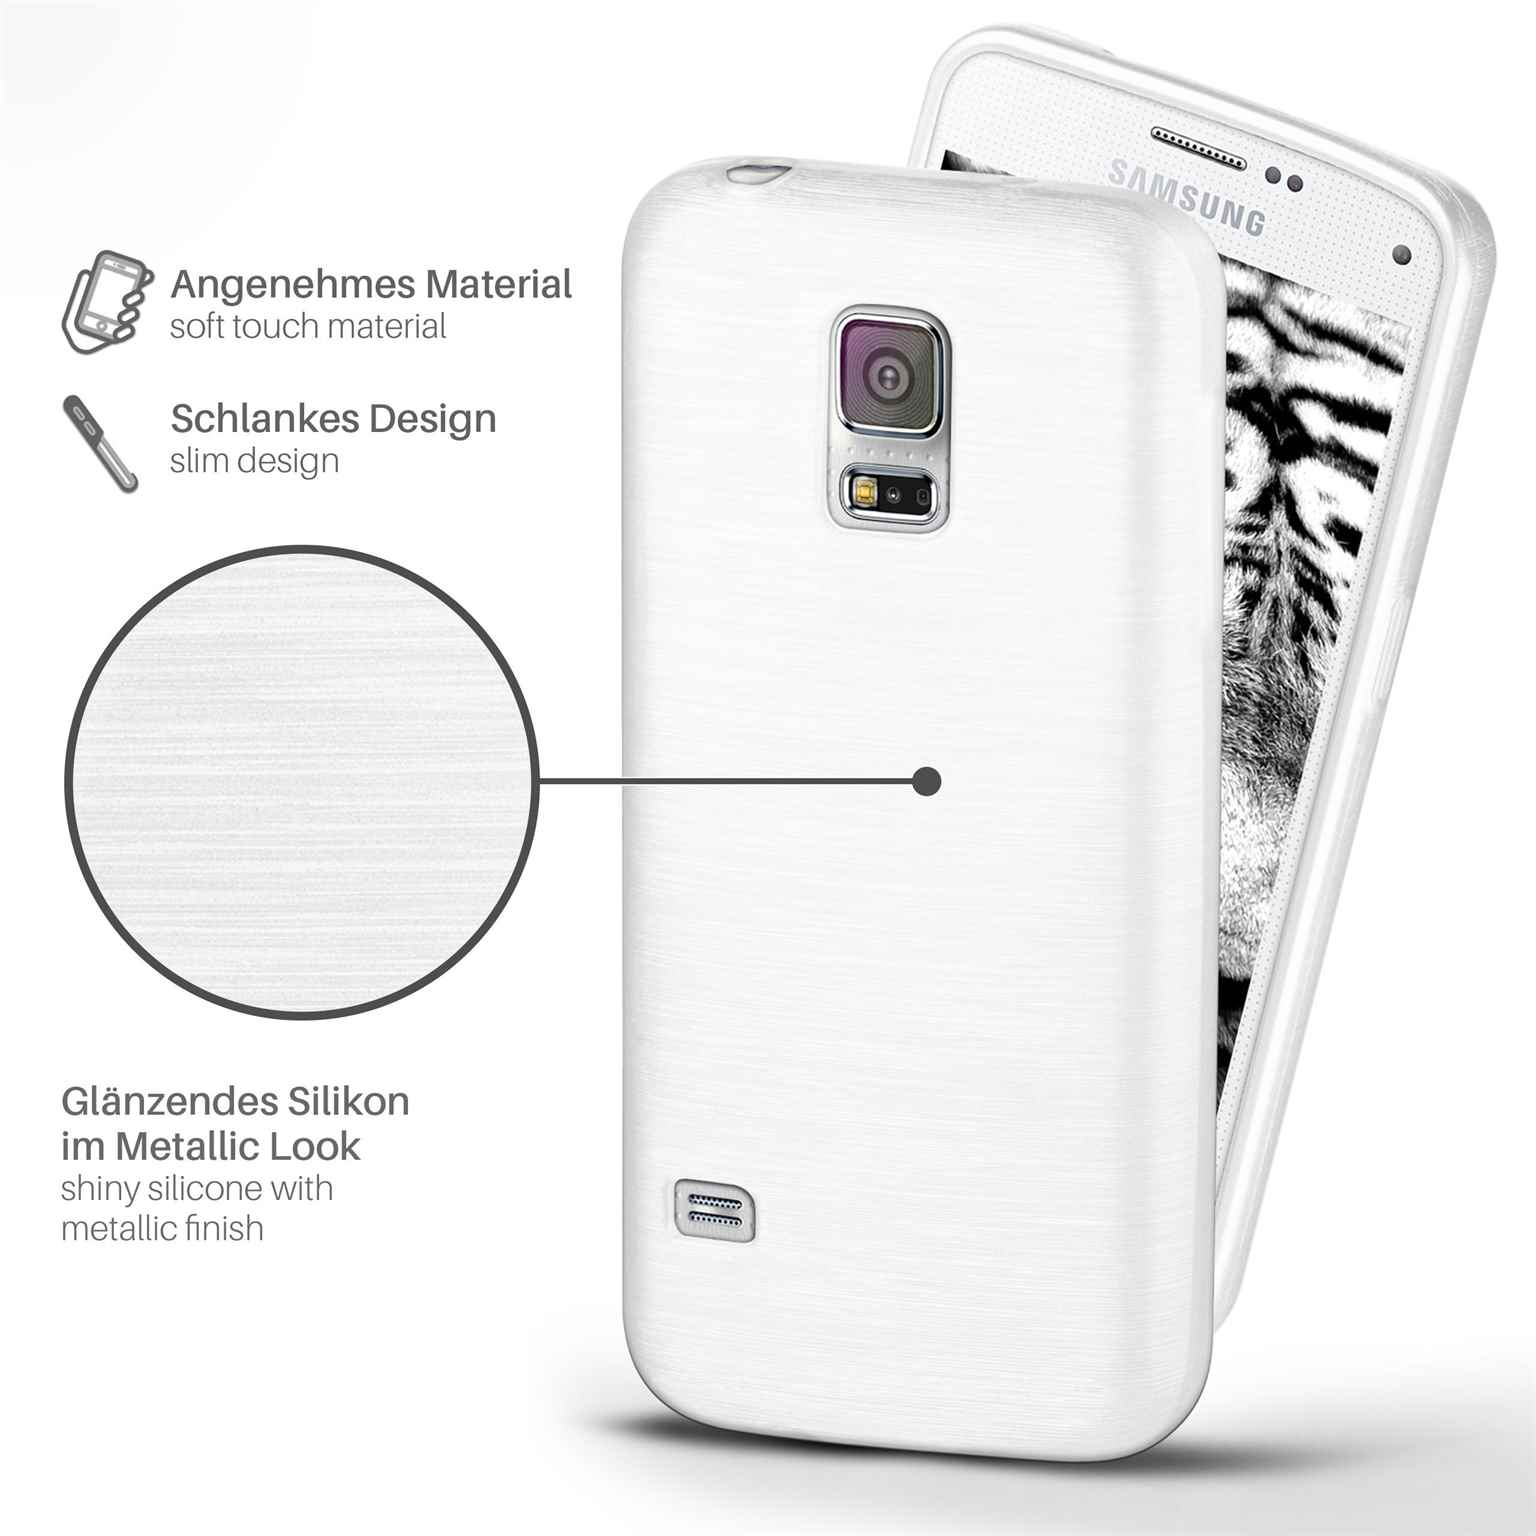 Brushed MOEX Case, Pearl-White Galaxy Backcover, Samsung, Neo, S5